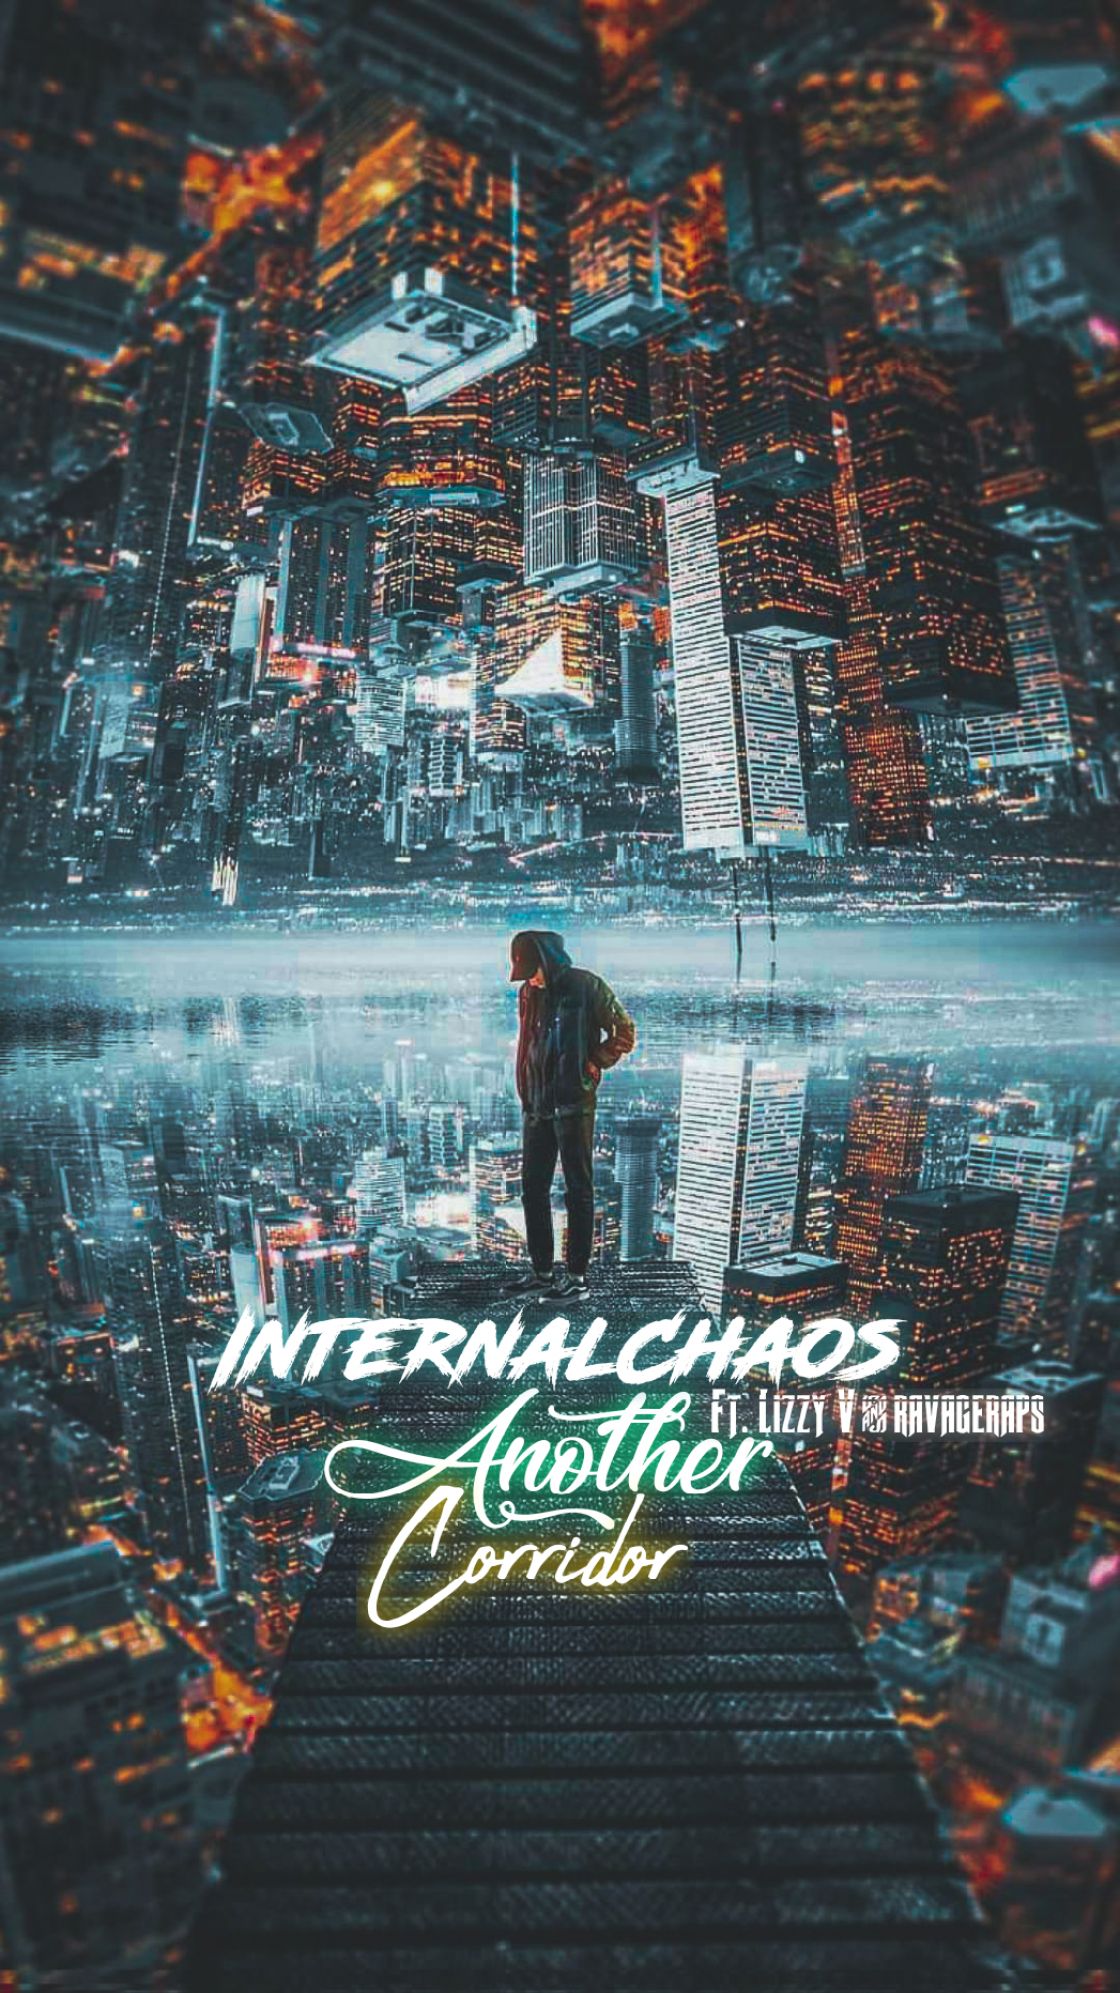 InternalChaos&#039; drop new song entitled &#039;Another Corrido&#039;